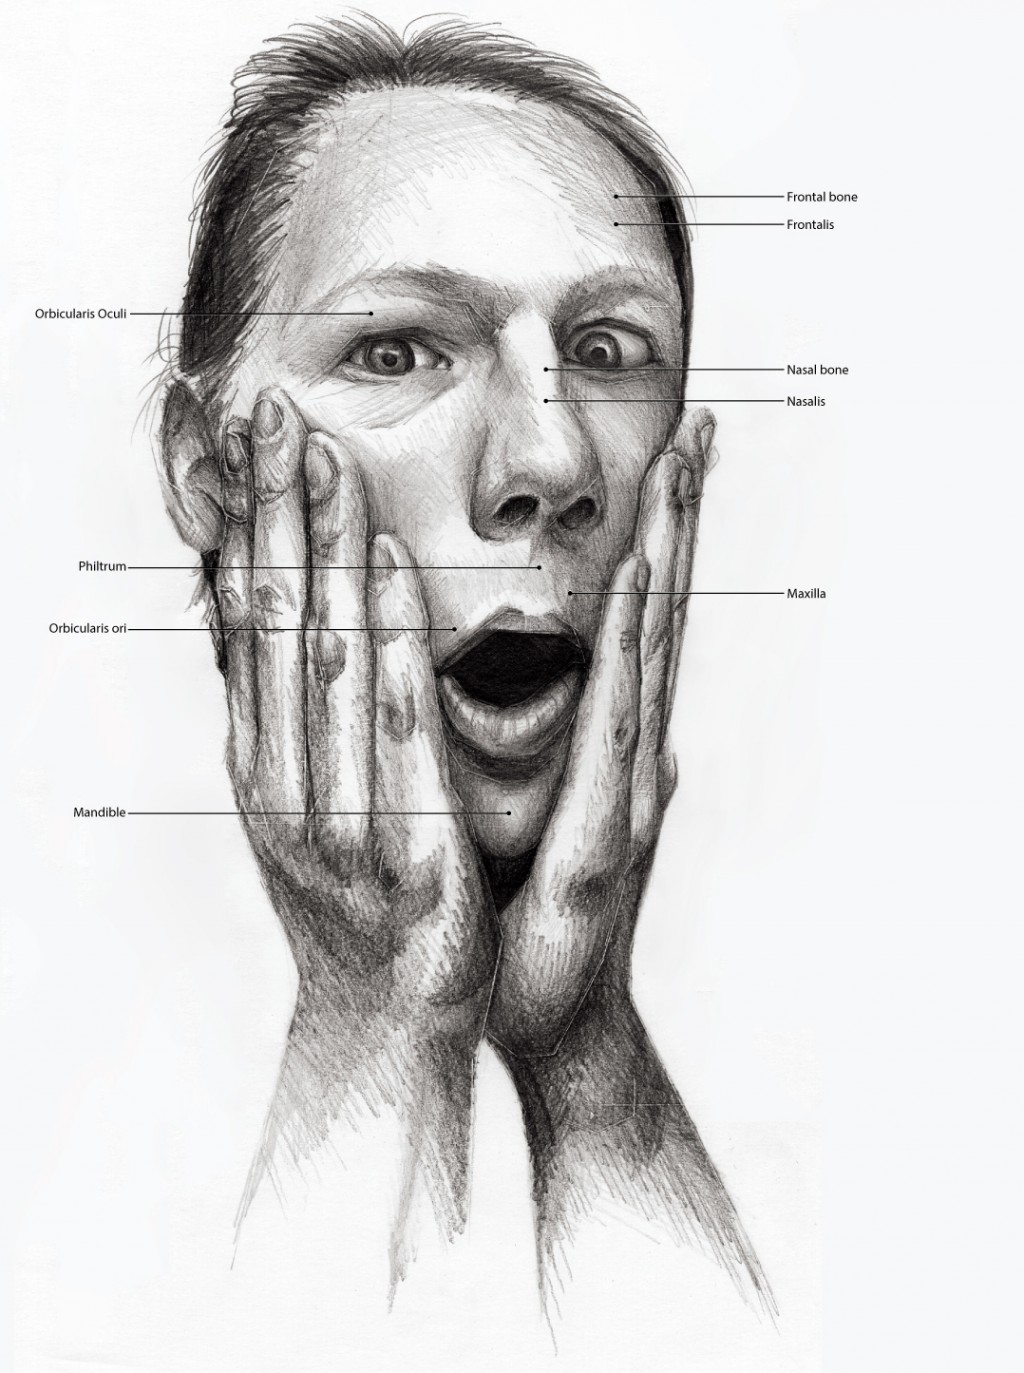 Black and White illustration of someone holding their breath. Anatomical features labeled.